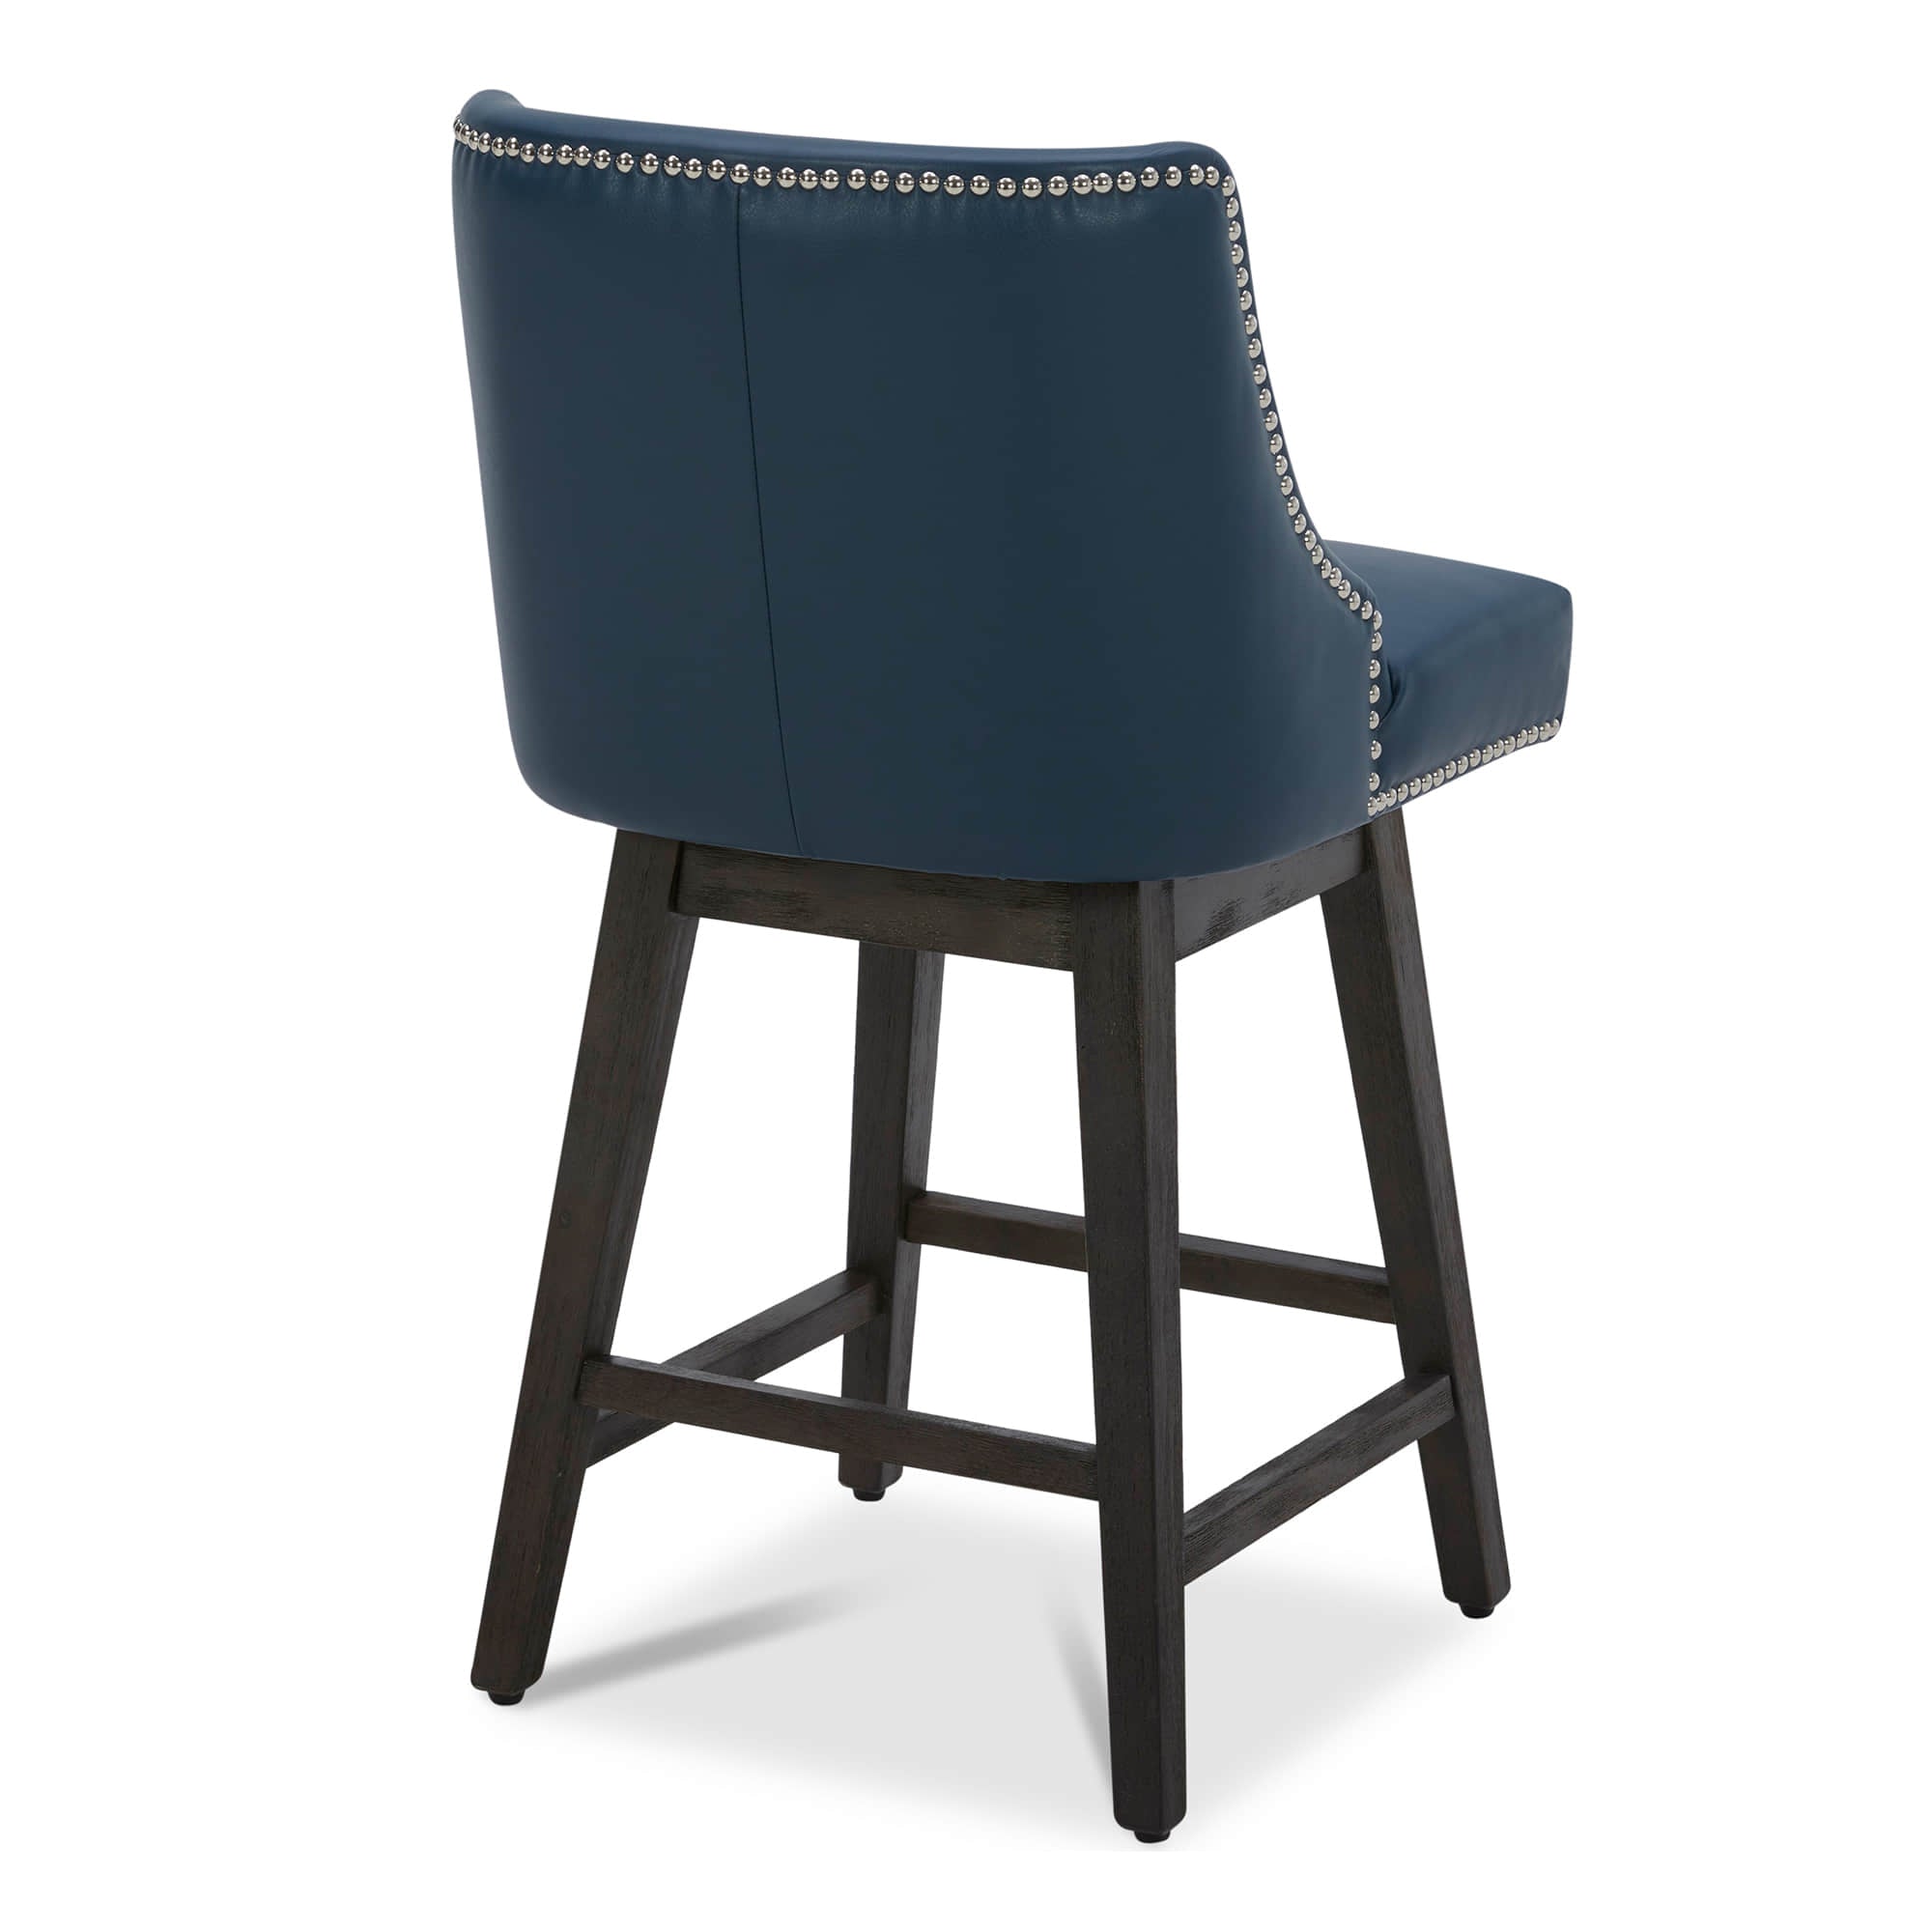 CHITA LIVING-Asher Swivel Counter Stool with Nailhead Trim( Set of 2)-Counter Stools-Faux Leather-Blue-